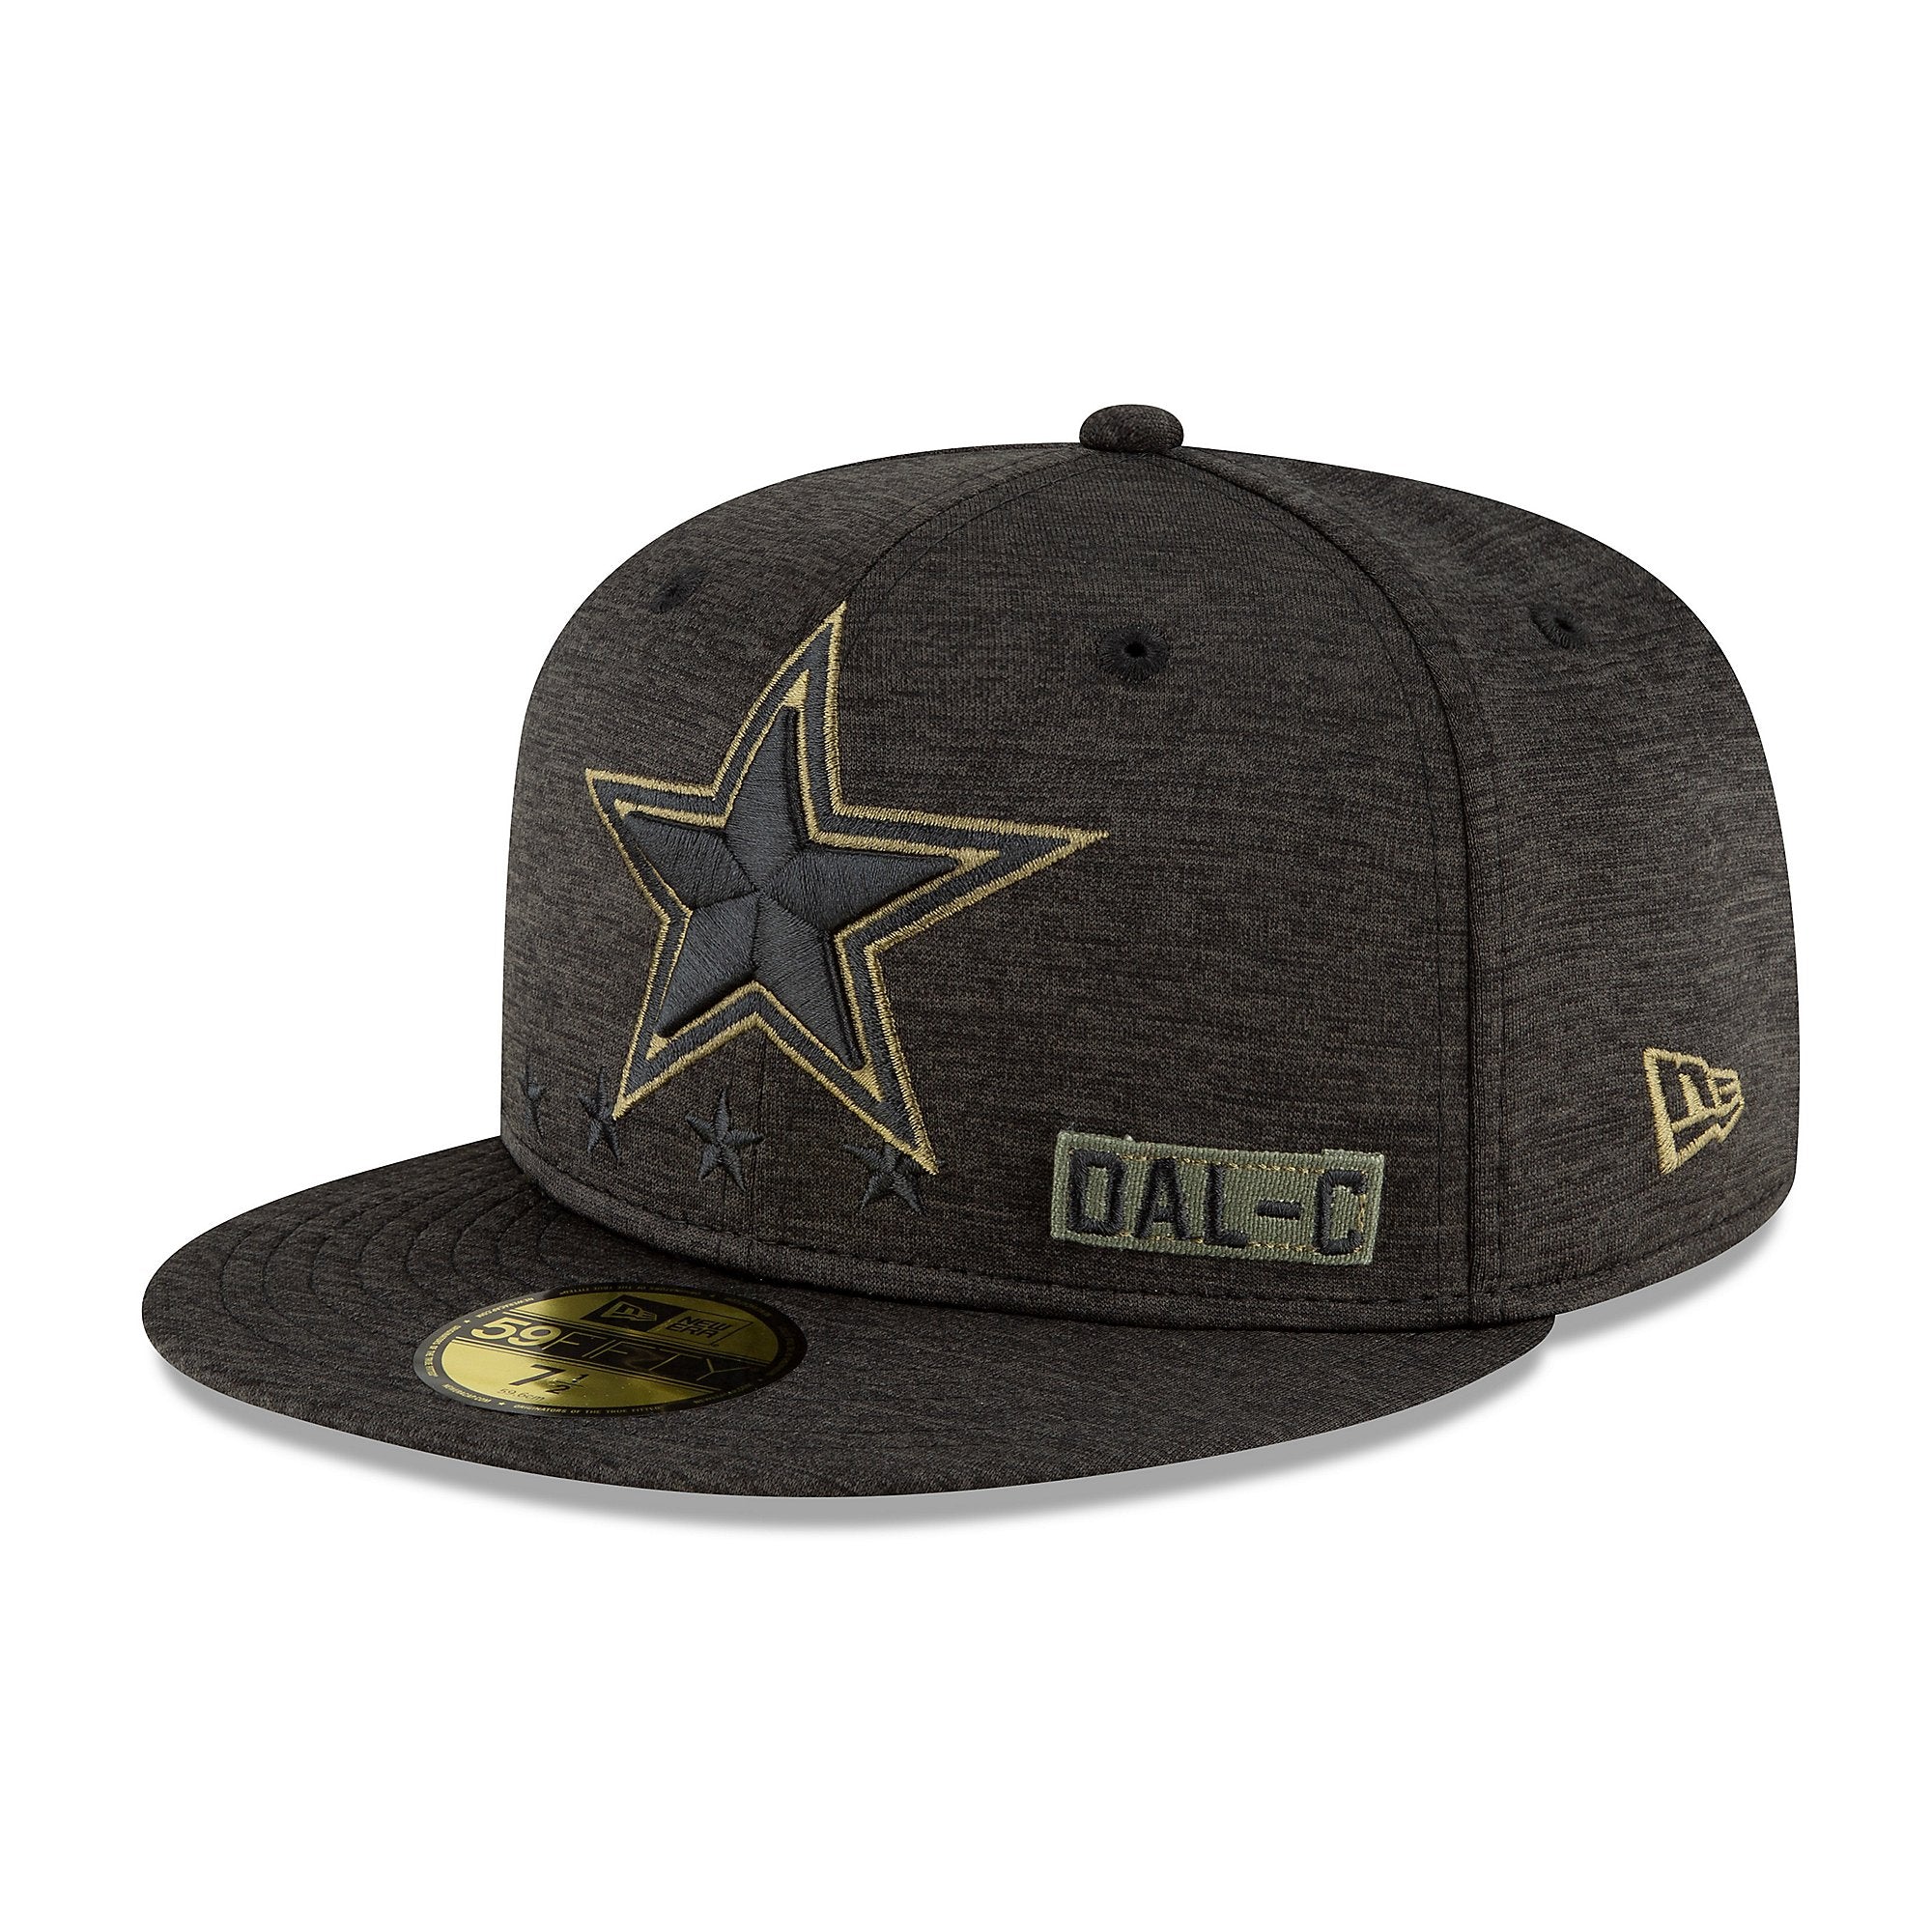 Dallas Cowboys New Era Salute to Service 59FIFTY Hat 7 1/2